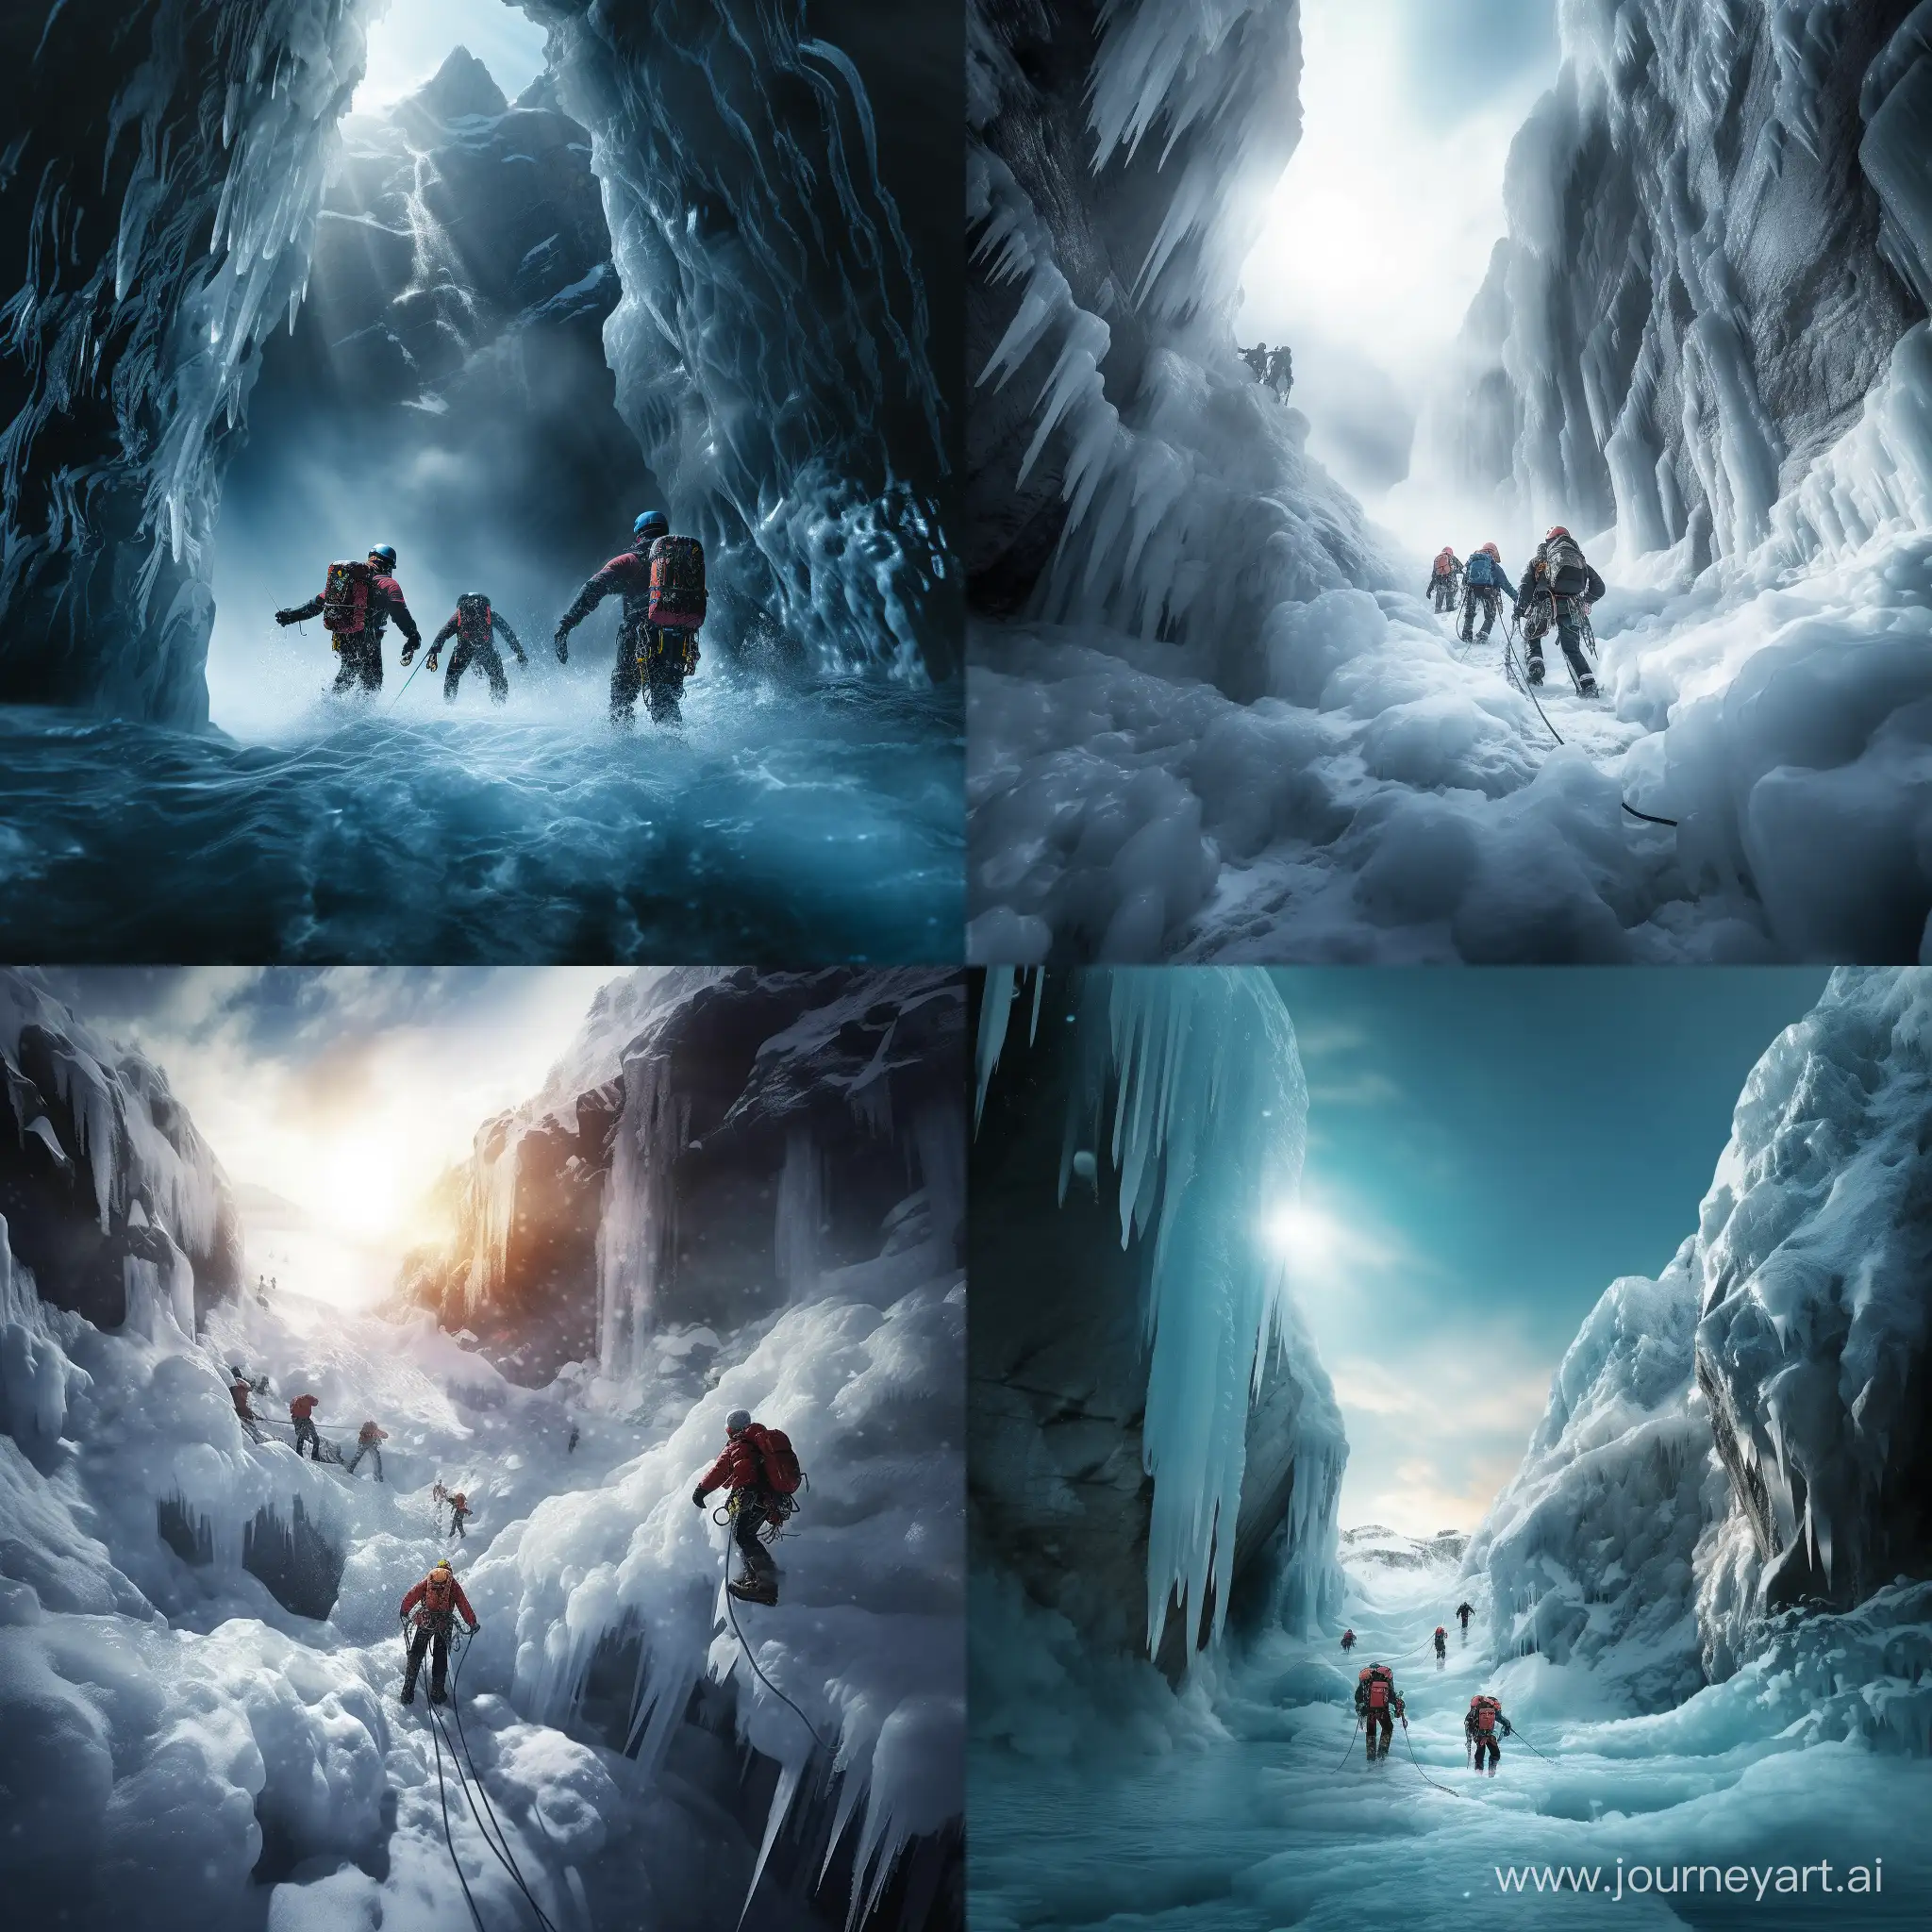 Winter-Canyoning-Adventure-Rappelling-and-Jumping-in-Snowy-Wilderness